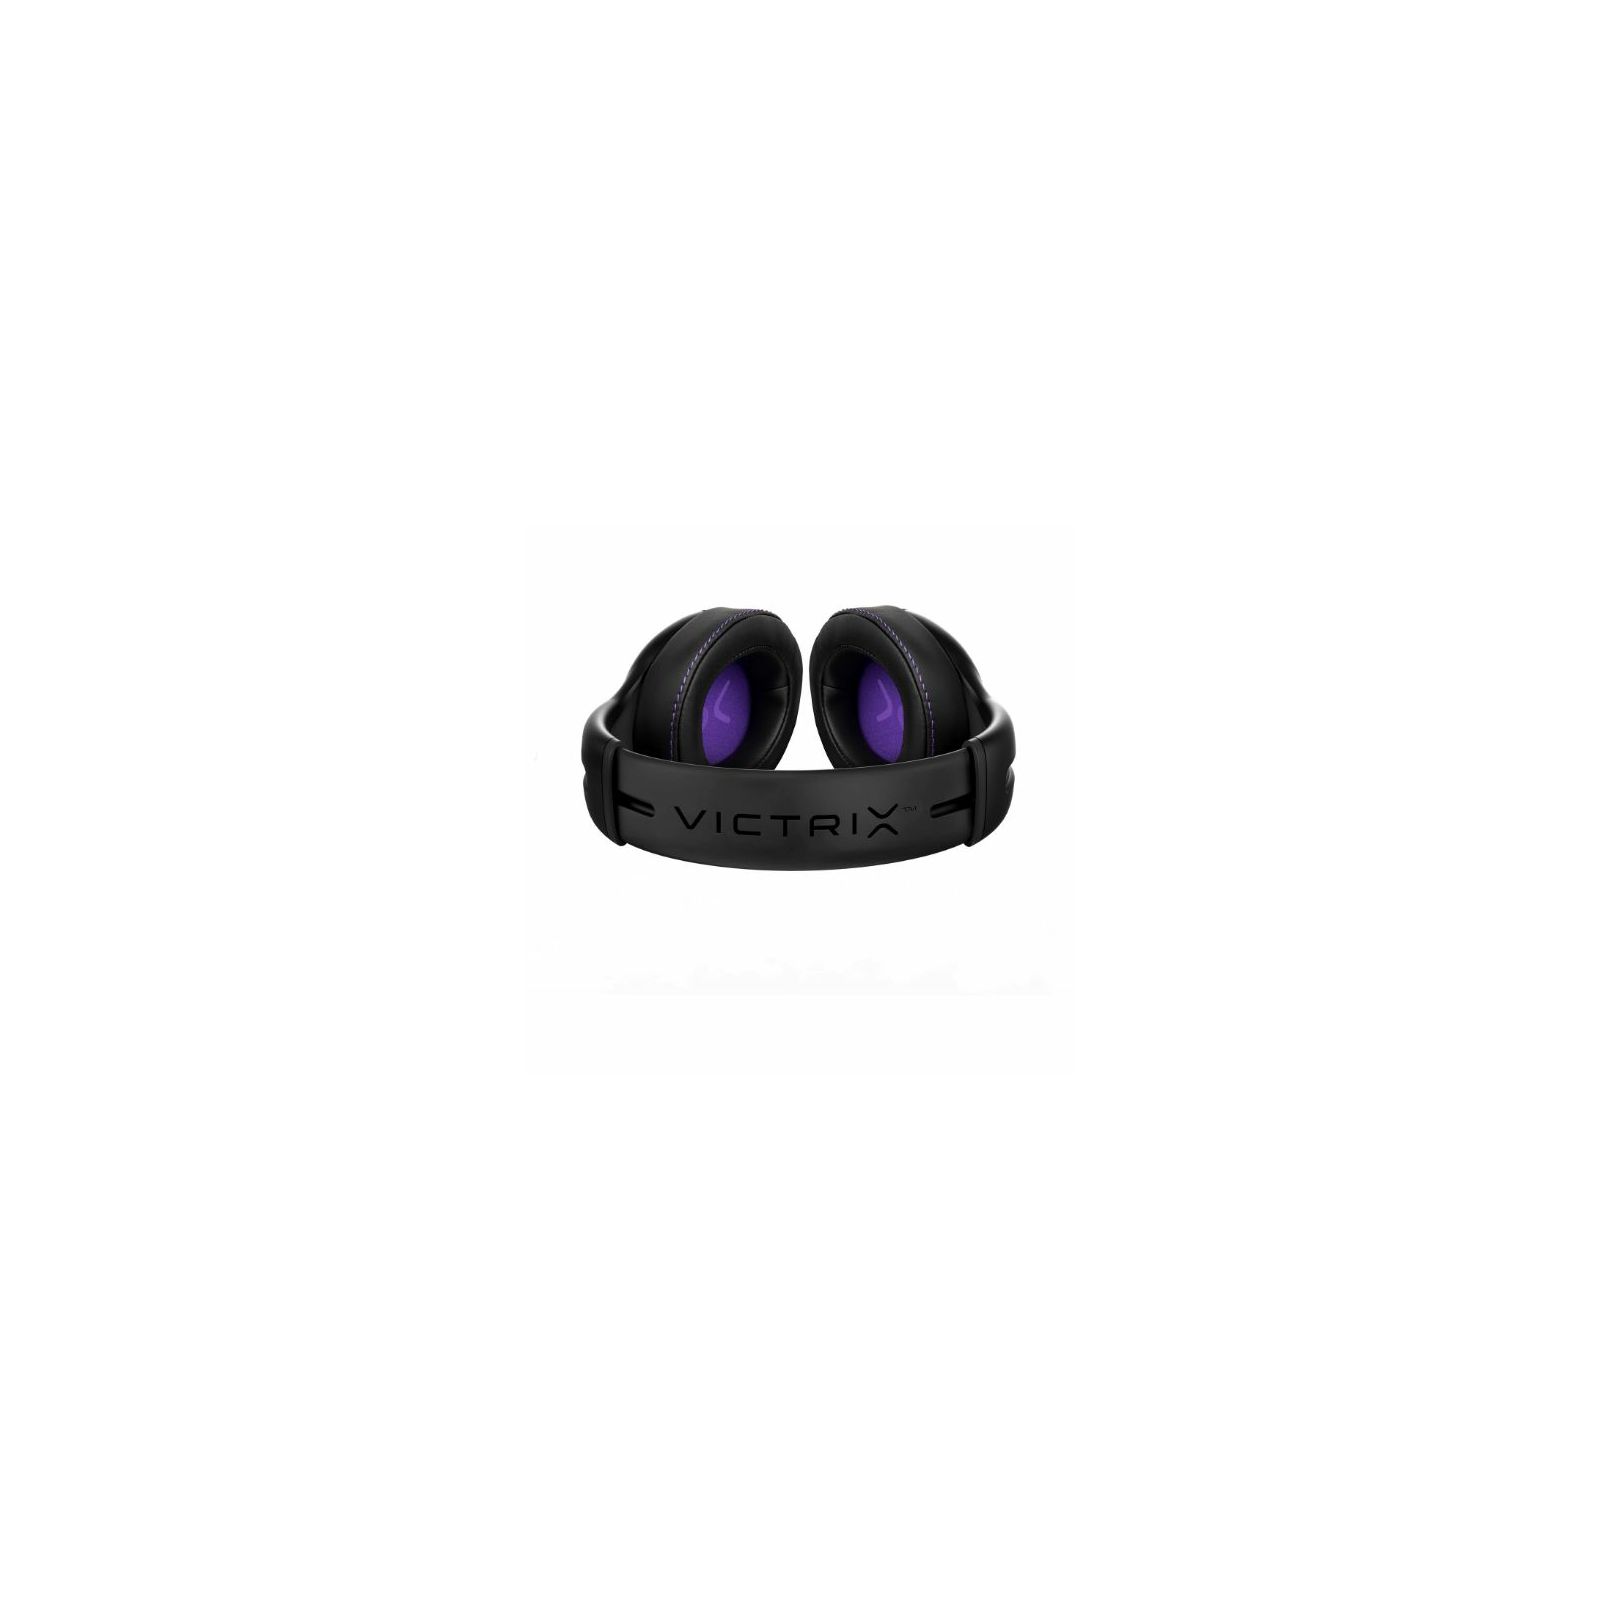 pdp-victrix-gambit-headset-for-ps5ps5-708056067557_45181.jpg